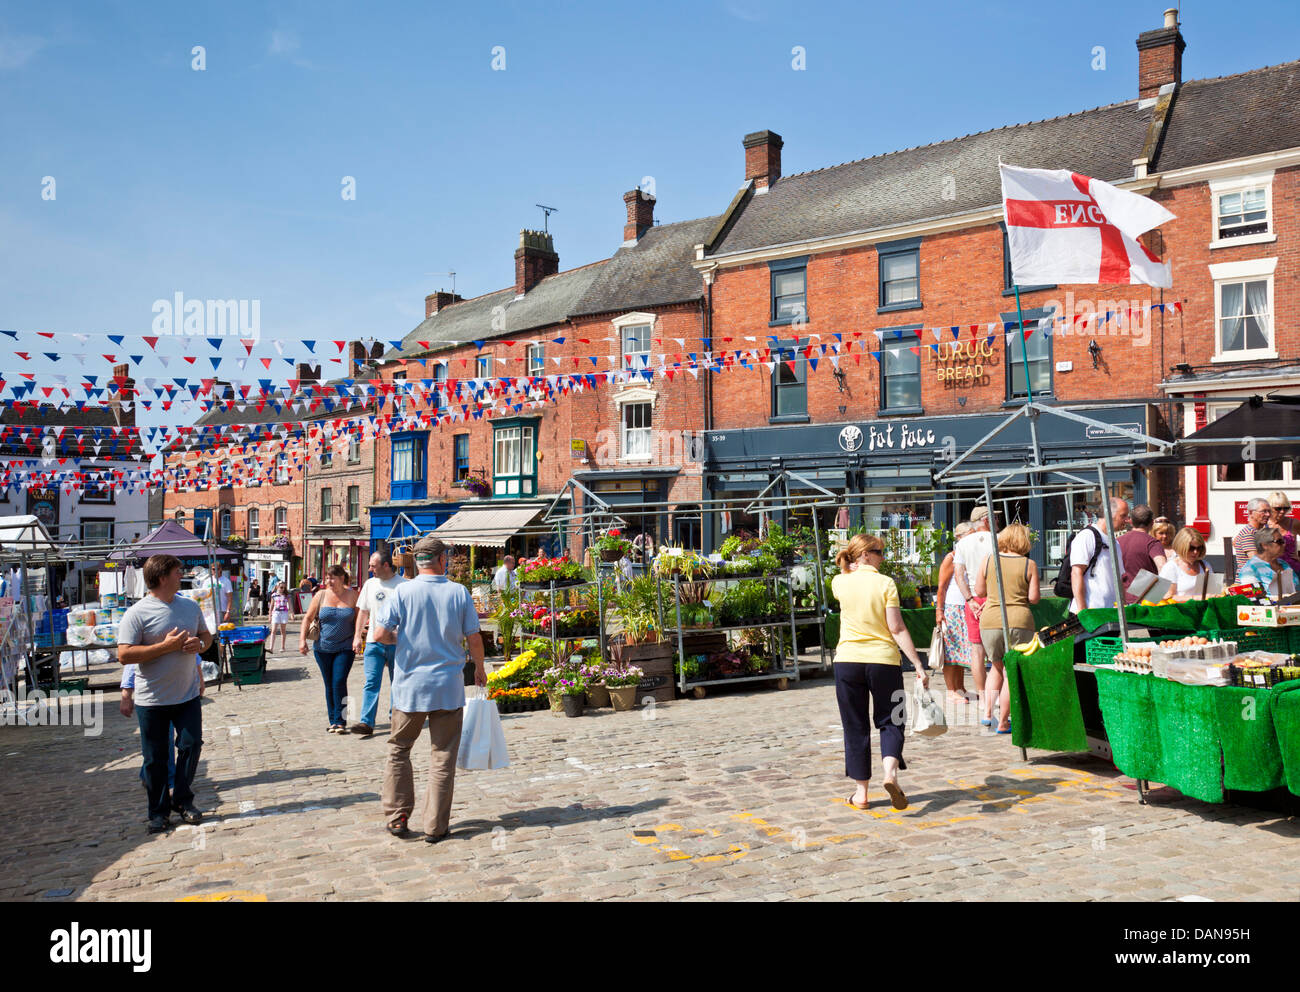 Town centre decked with bunting and market place with stalls Ashbourne Derbyshire England UK GB EU Europe Stock Photo